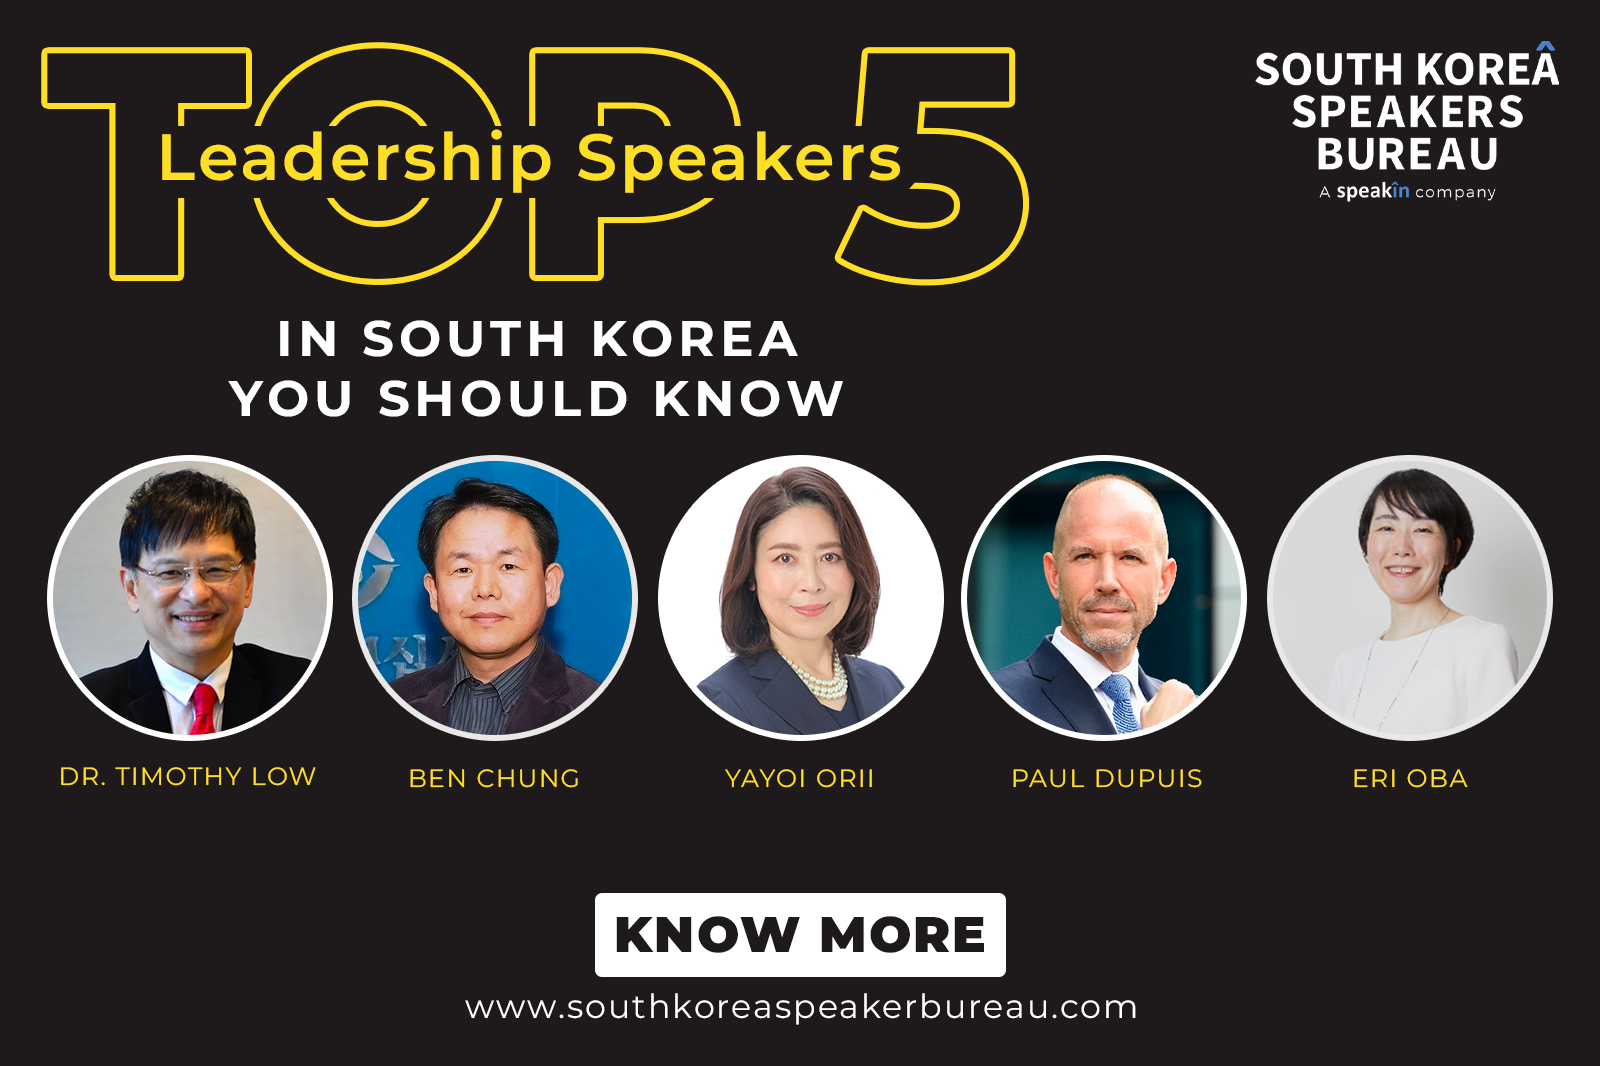 Top 5 Leadership Speakers in South Korea You Should Know